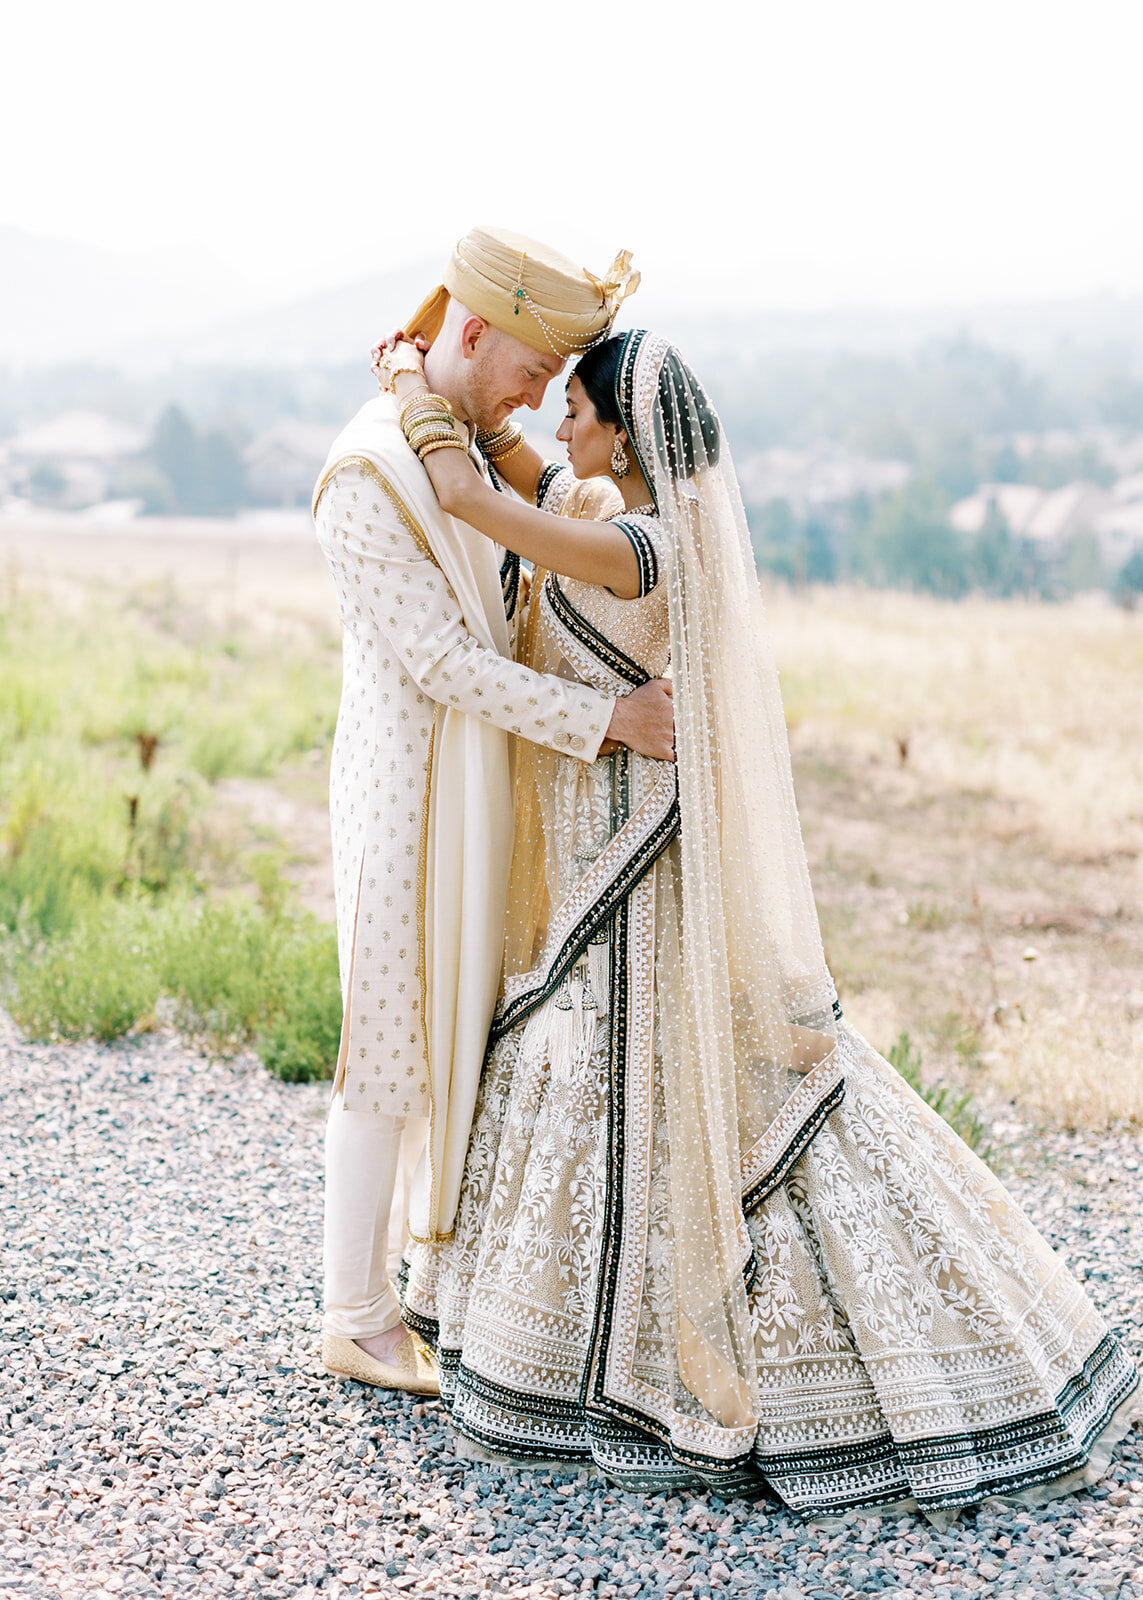 Bride and groom embracing at a South Asian Fusion wedding in Colorado